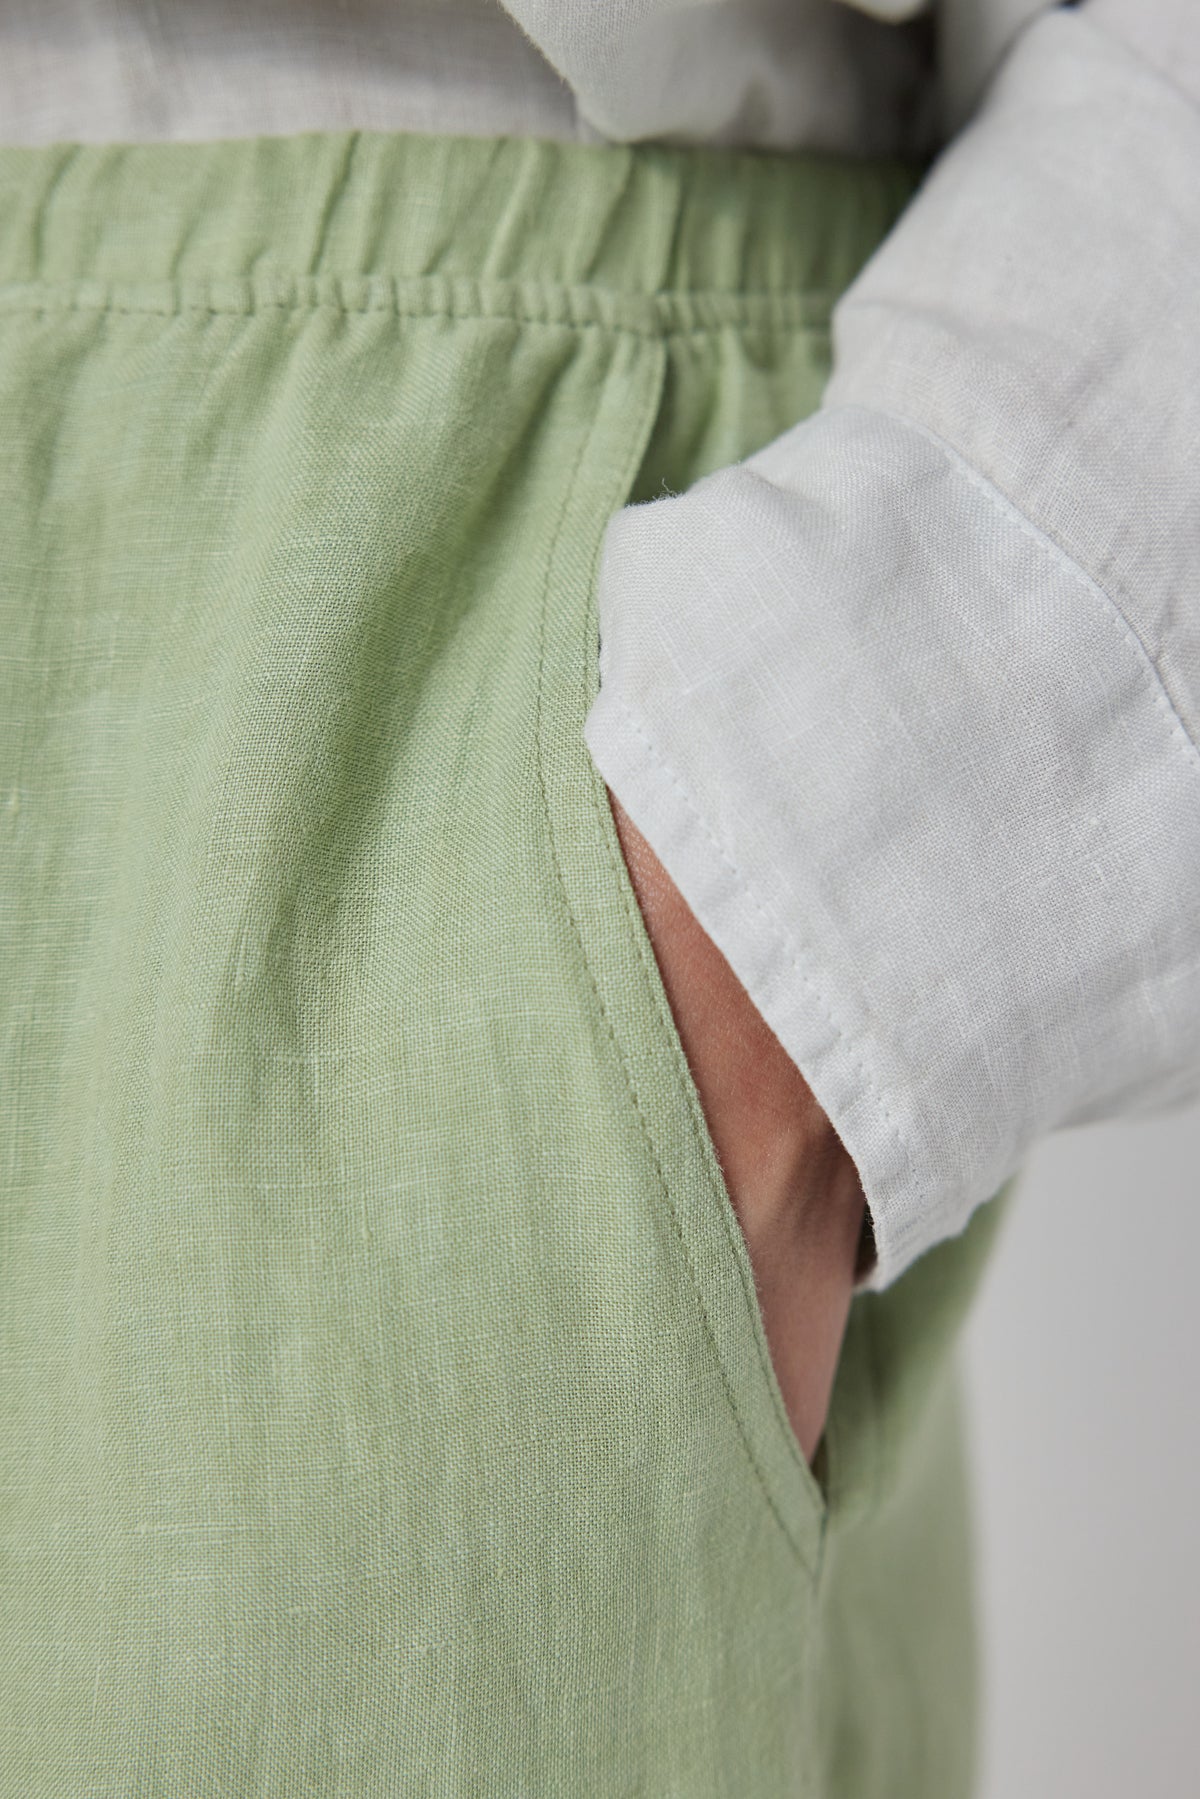 Close-up of a person wearing Velvet by Jenny Graham's PICO LINEN PANT in green, with a white shirt partially tucked in, focusing on the elastic waist and fabric detail.-36168858632385